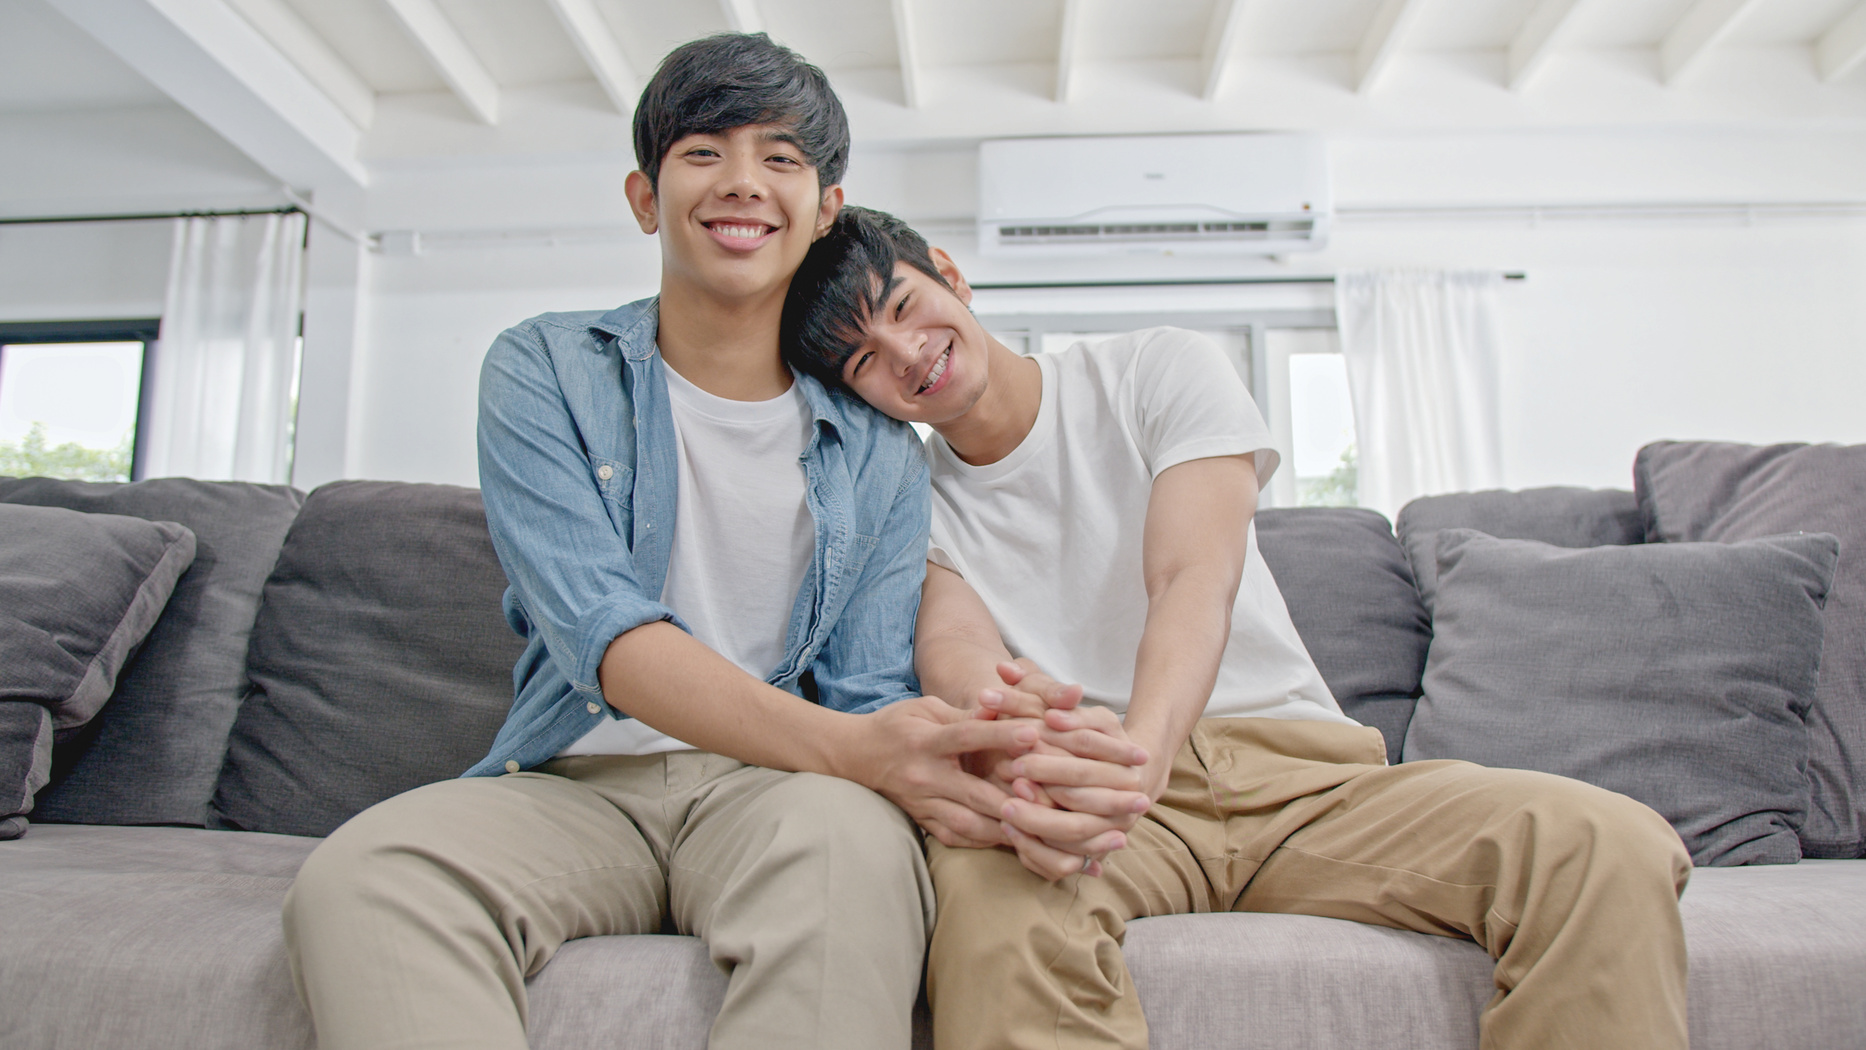 Young cuYoung cute asian gay loving couple holding on Sofa.teens homosexual couple.LGBTG Concept.Love and Relationshipste asian gay couple looking to laptop.teens homosexual couple.LGBTQ Concept.Love and Relationships